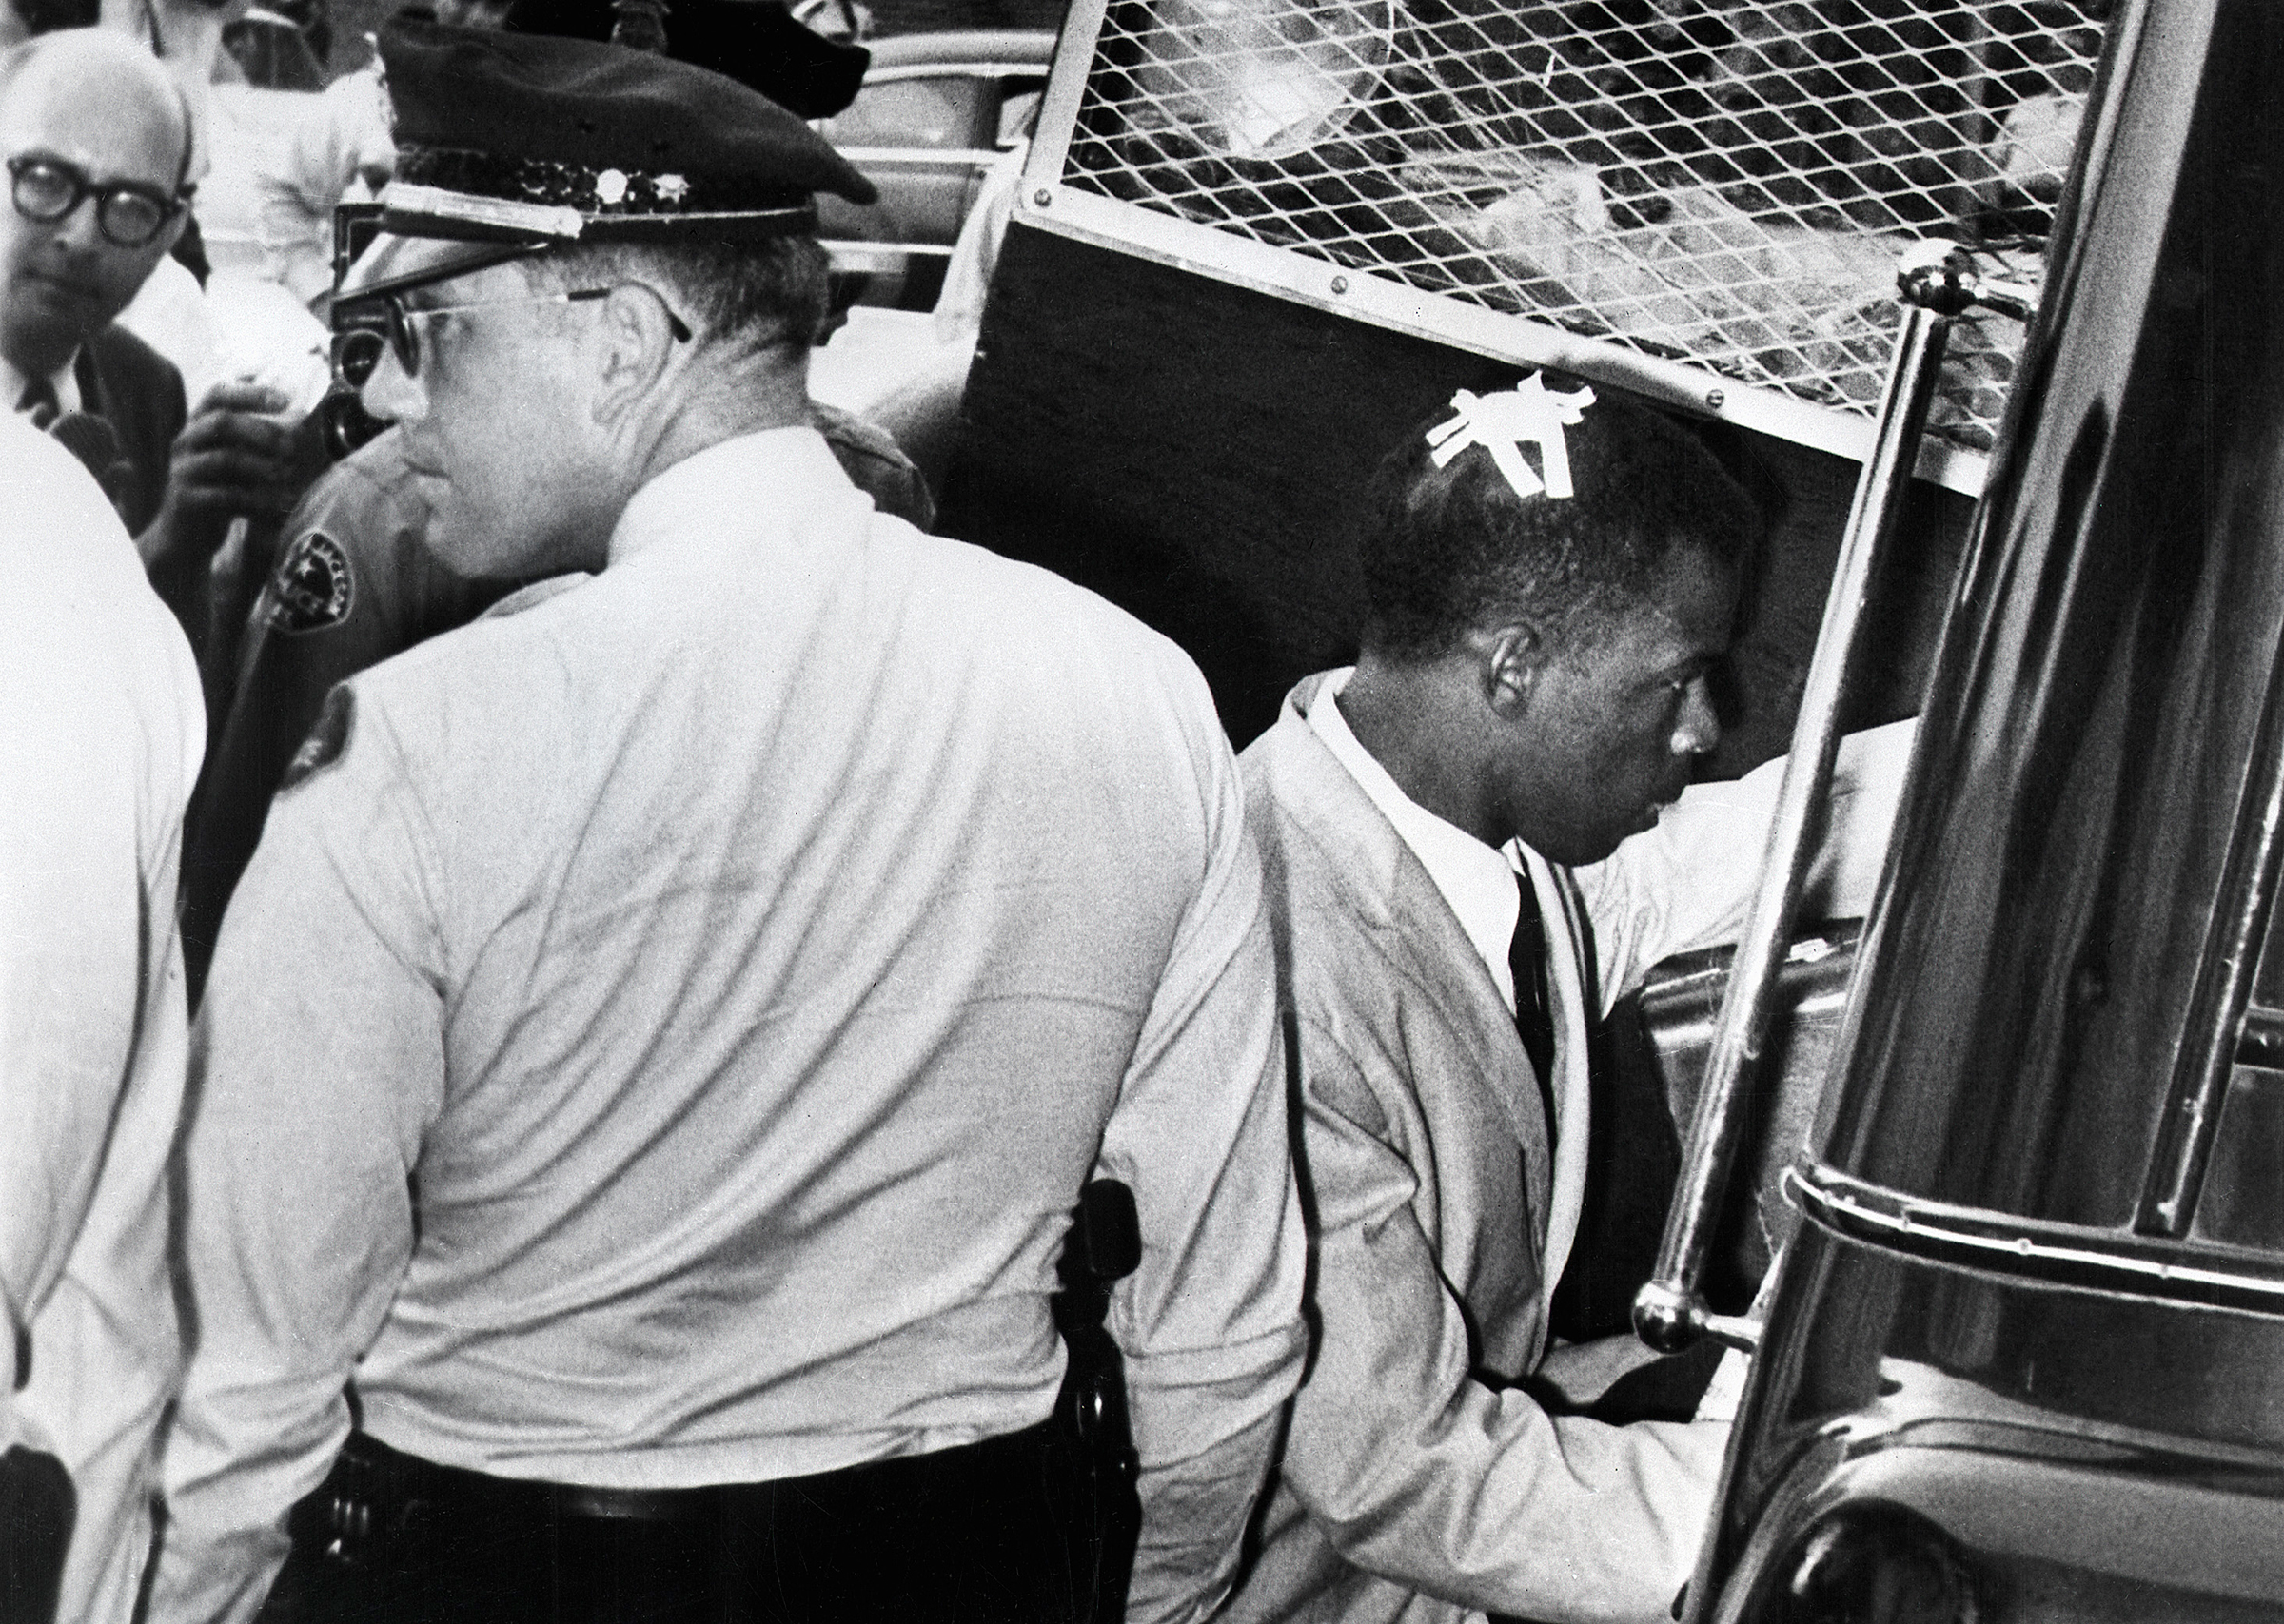 With an "X" made of tape still on his head, marking the spot where he was struck in Montgomery, Ala., John Lewis enters a police van after his arrest in Jackson, Miss., in May 1961. (Bettmann Archive/Getty Images)